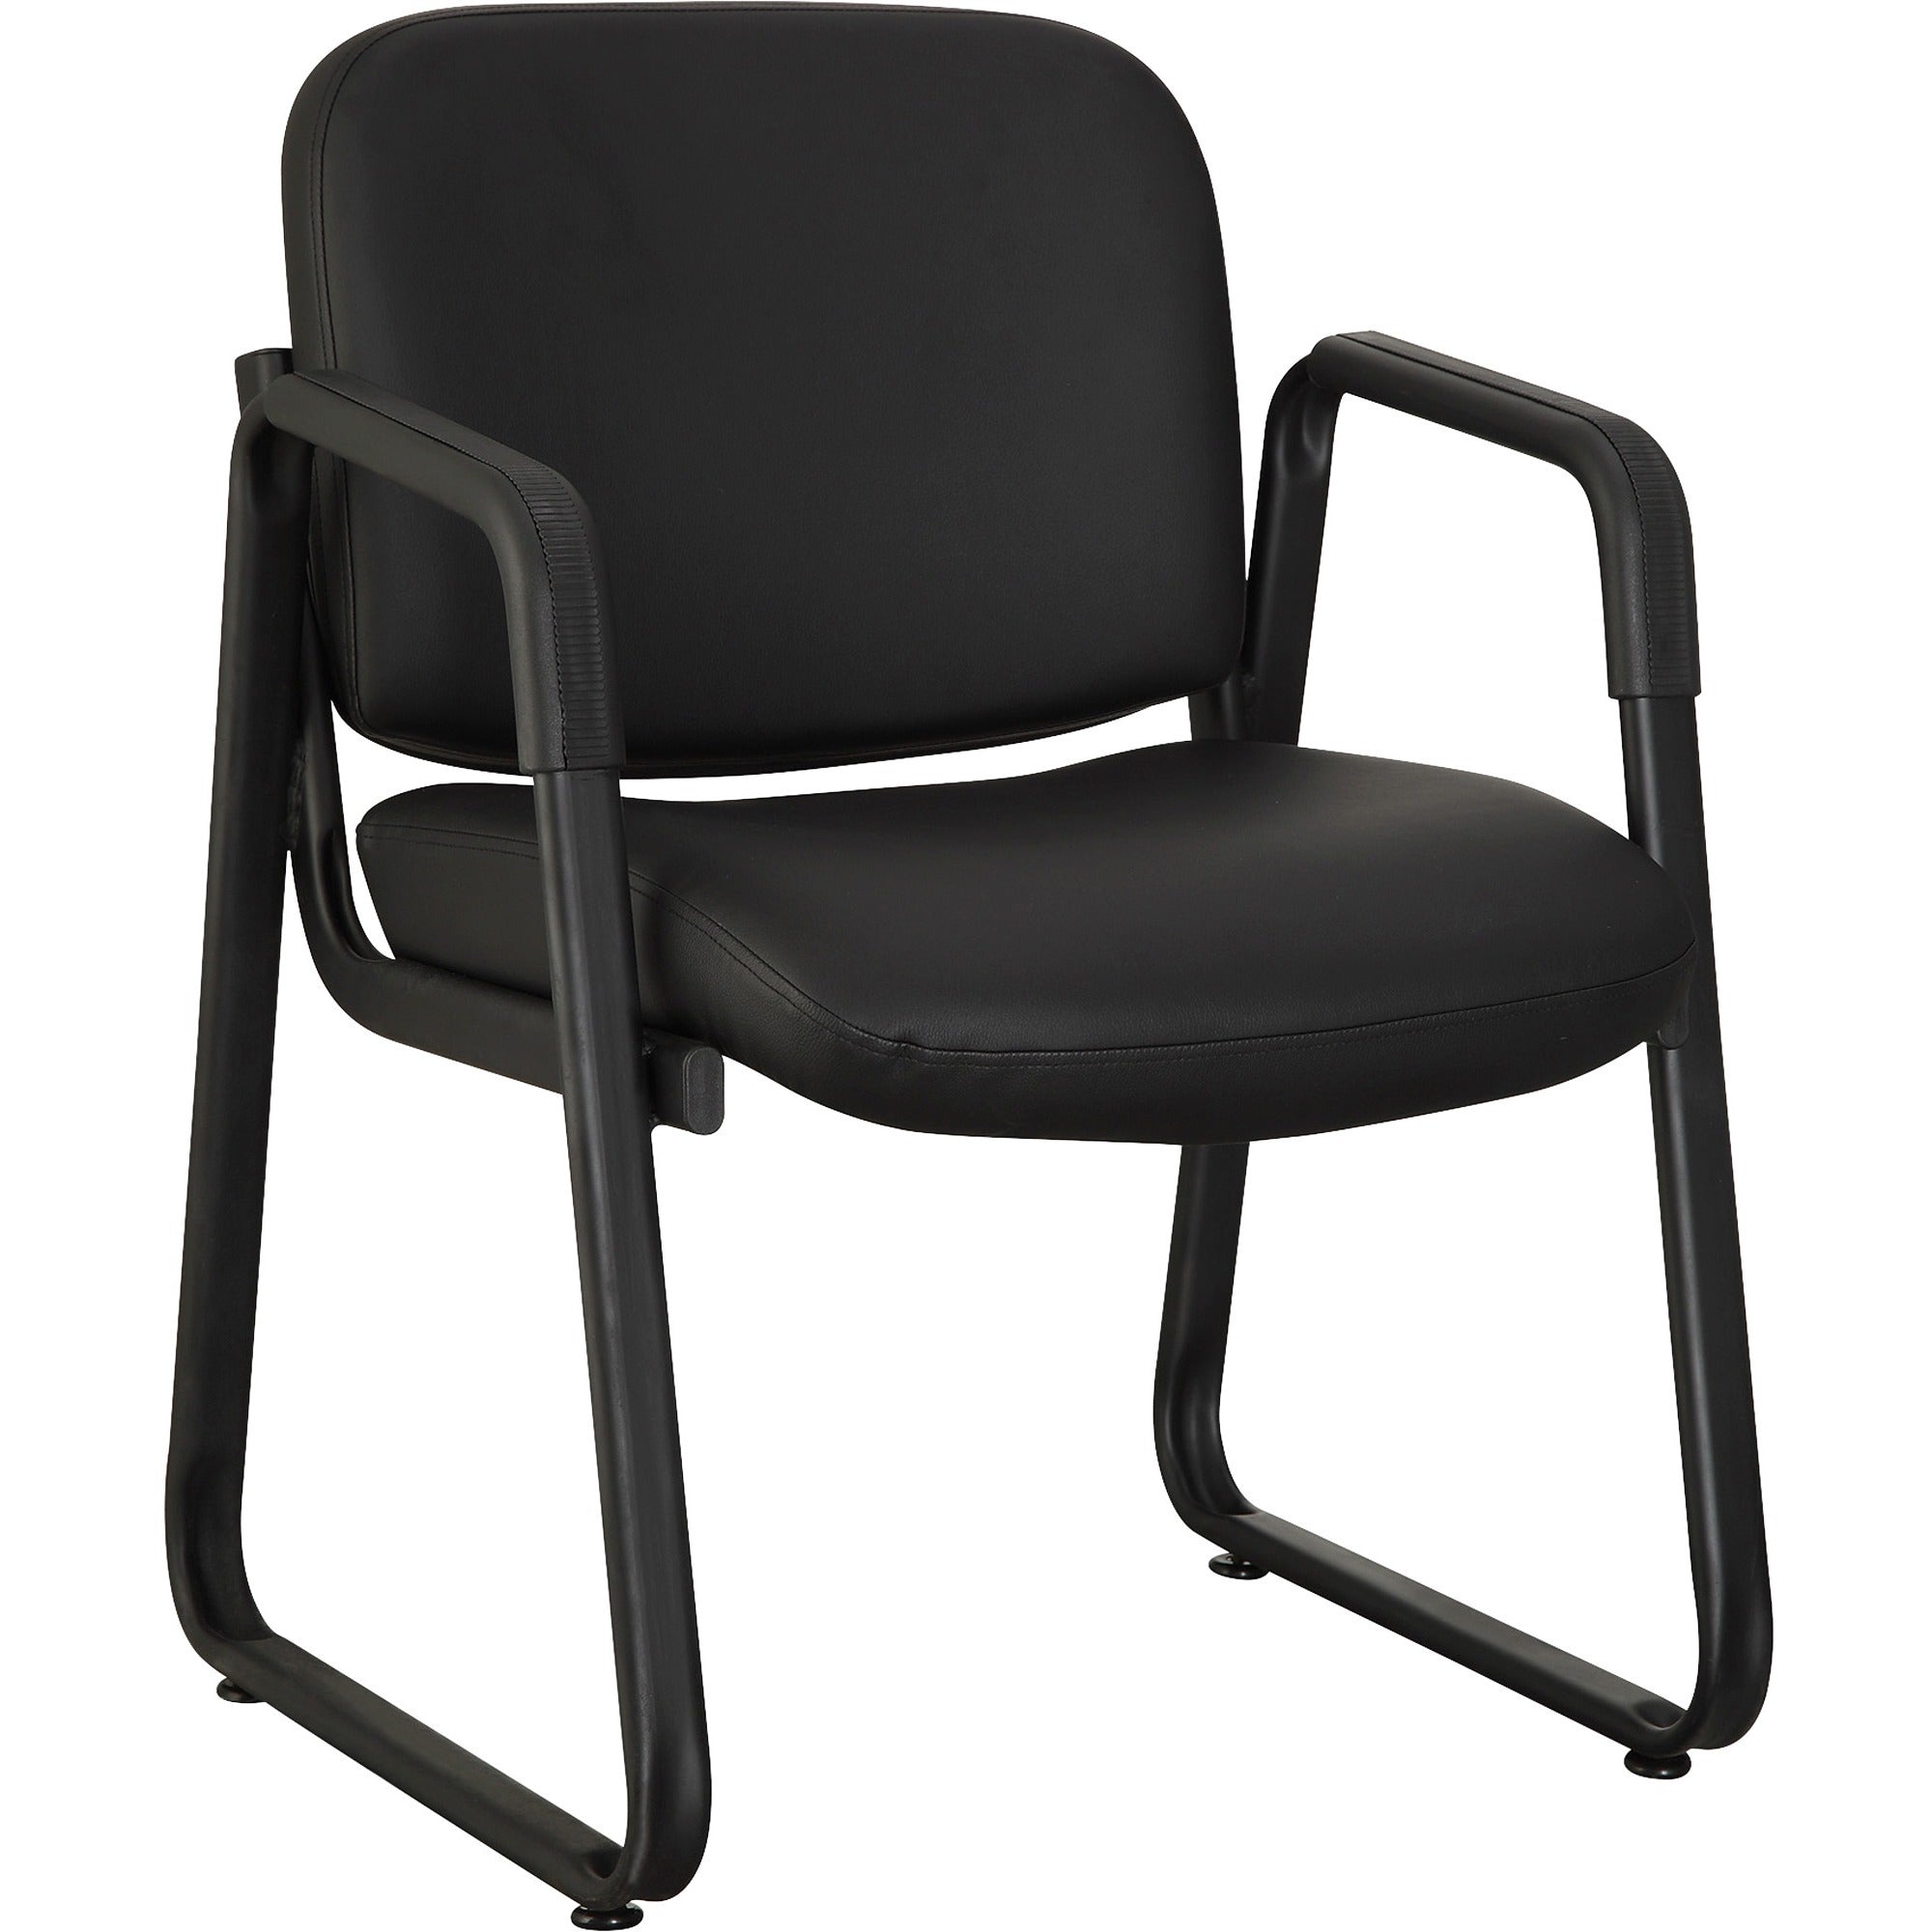 Lorell Upholstered Guest Chair - Black Leather, Plywood Seat - Black Leather, Plywood Back - Metal Frame - Black - 1 Each - 1